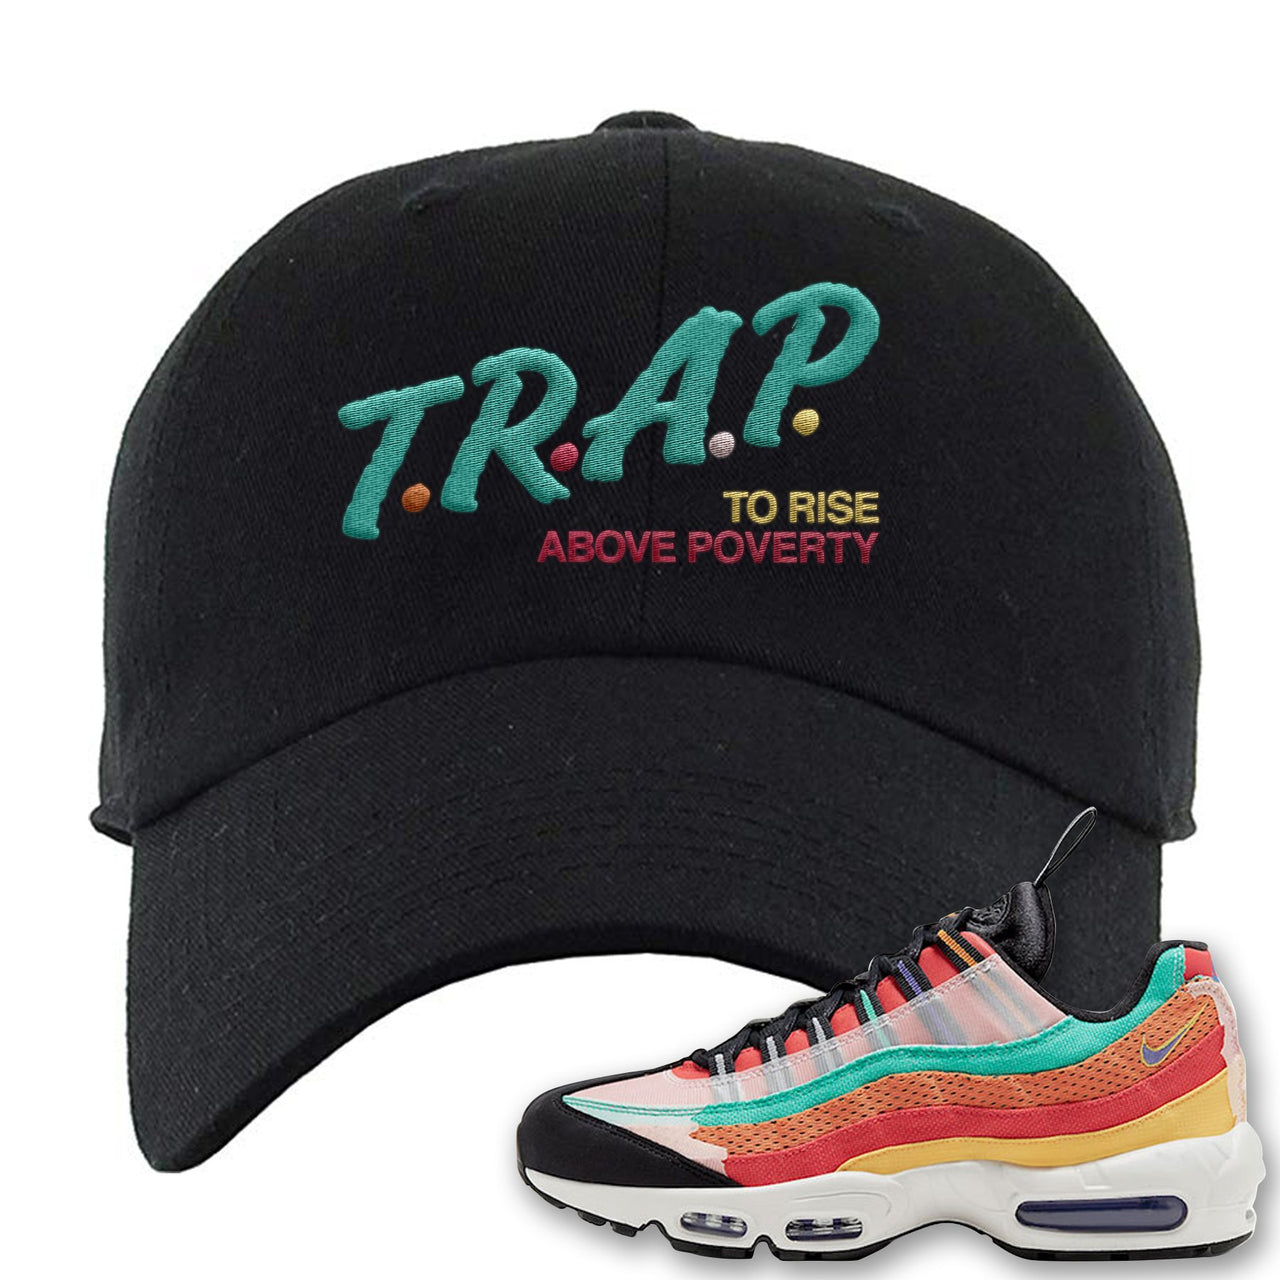 Air Max 95 Black History Month Sneaker Black Dad Hat | Hat to match Nike Air Max 95 Black History Month Shoes | Trap To Rise Above Poverty